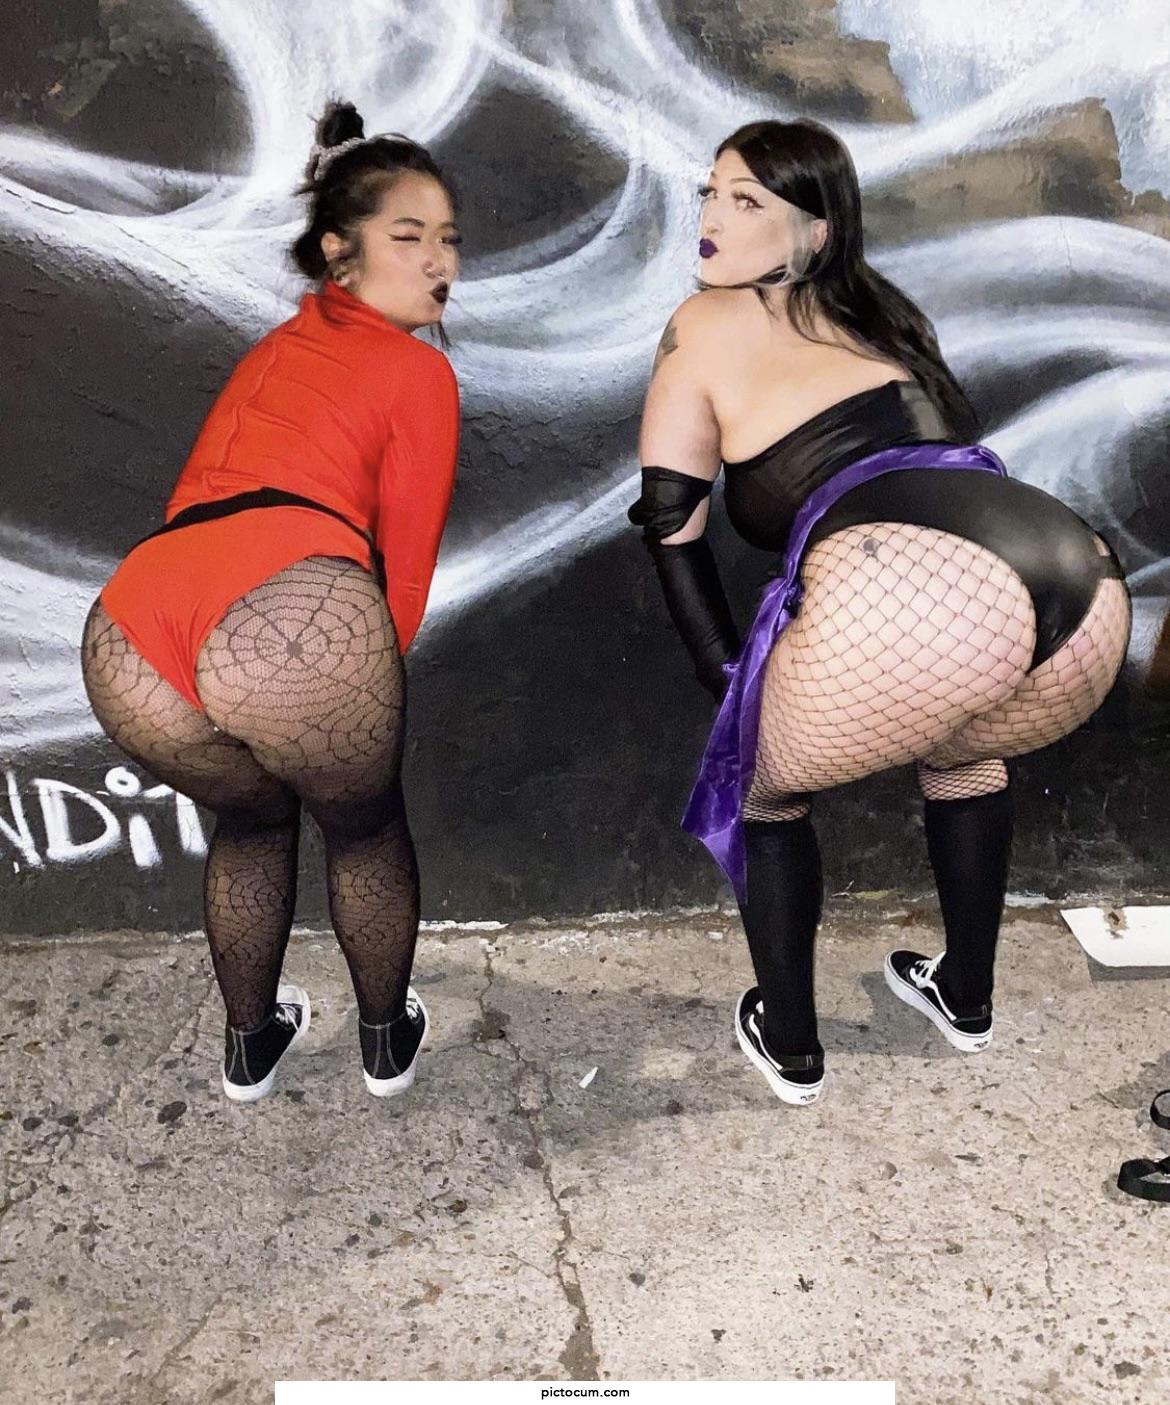 Fishnets and body suits for these sexy ladies